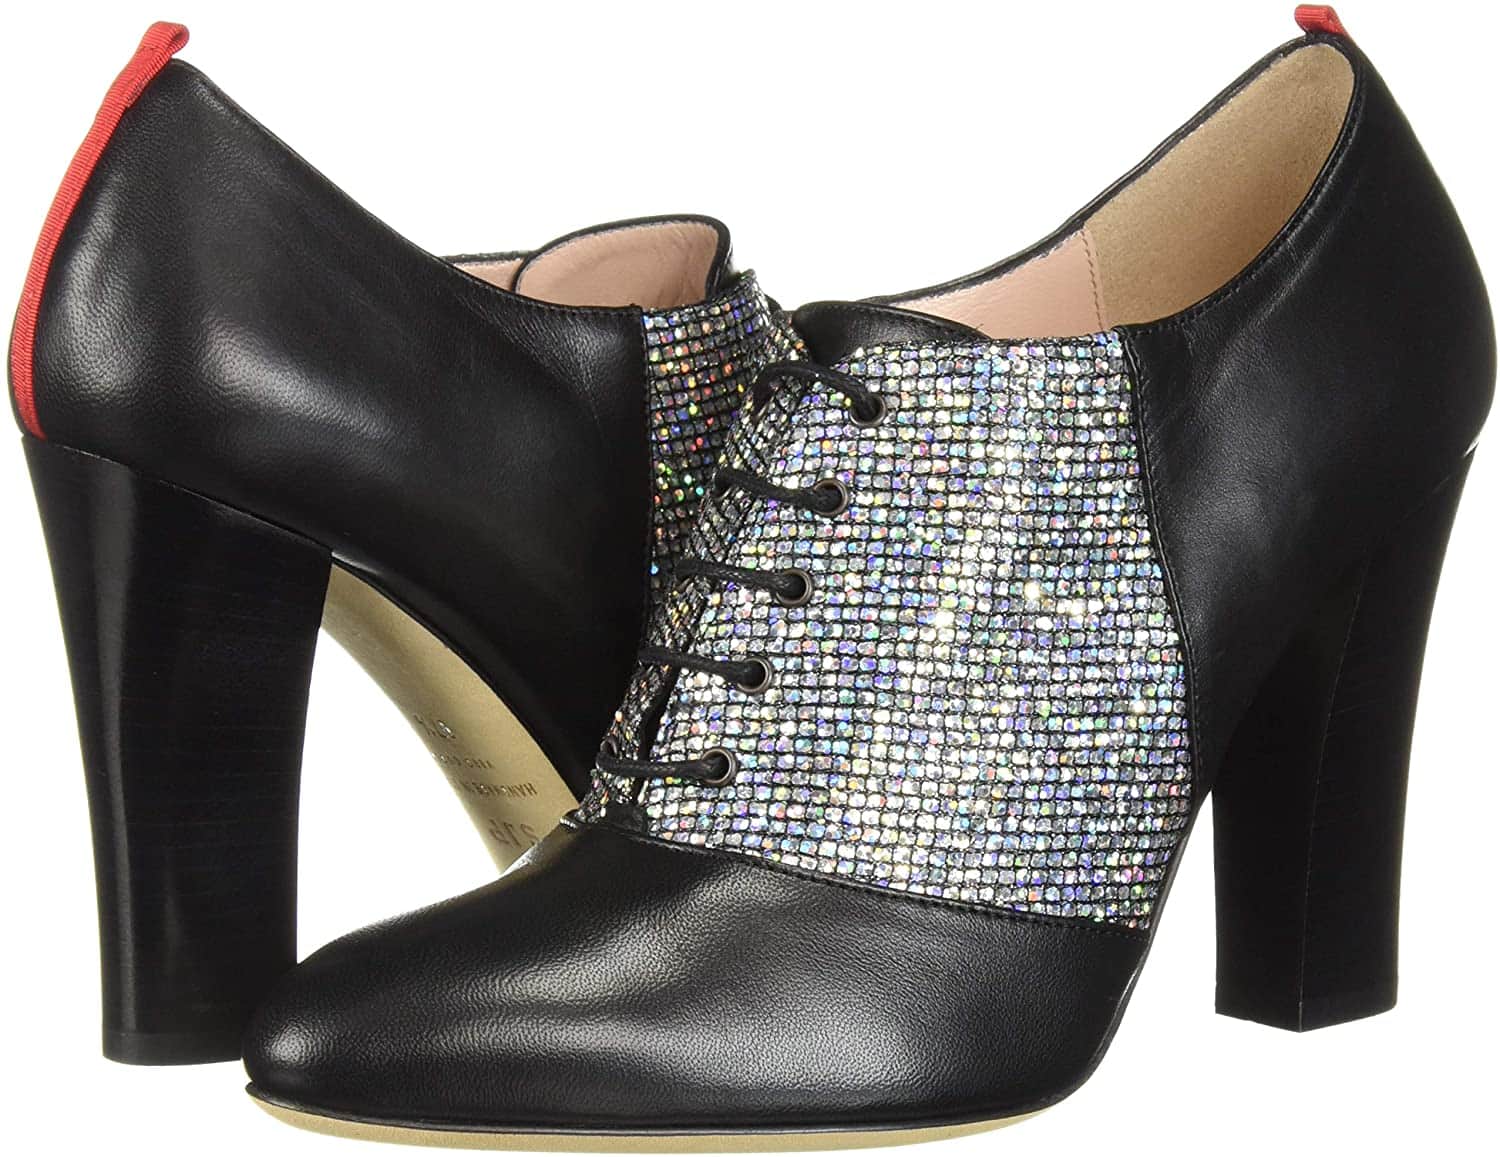 The SJP Chaucer heeled oxfords feature a rhinestone-encrusted lace-up vamp